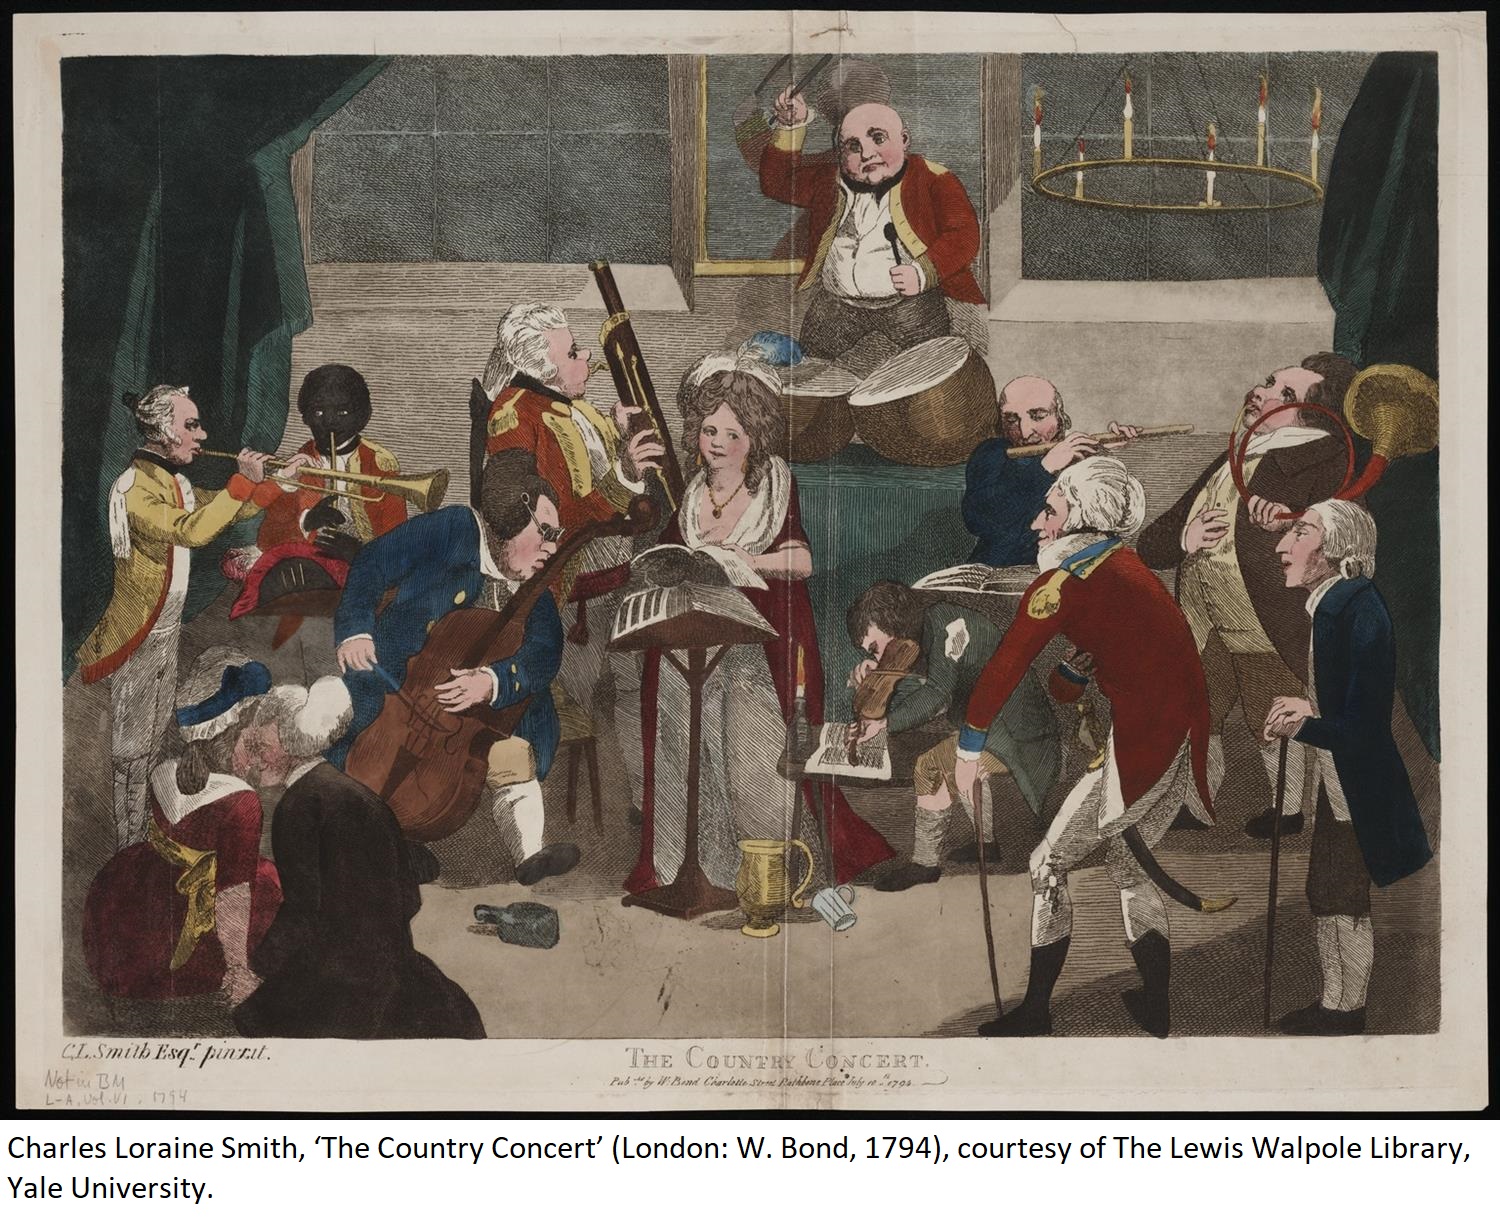 Charles Loraine Smith, ‘The Country Concert’ (London: W. Bond, 1794), courtesy of The Lewis Walpole Library, Yale University.